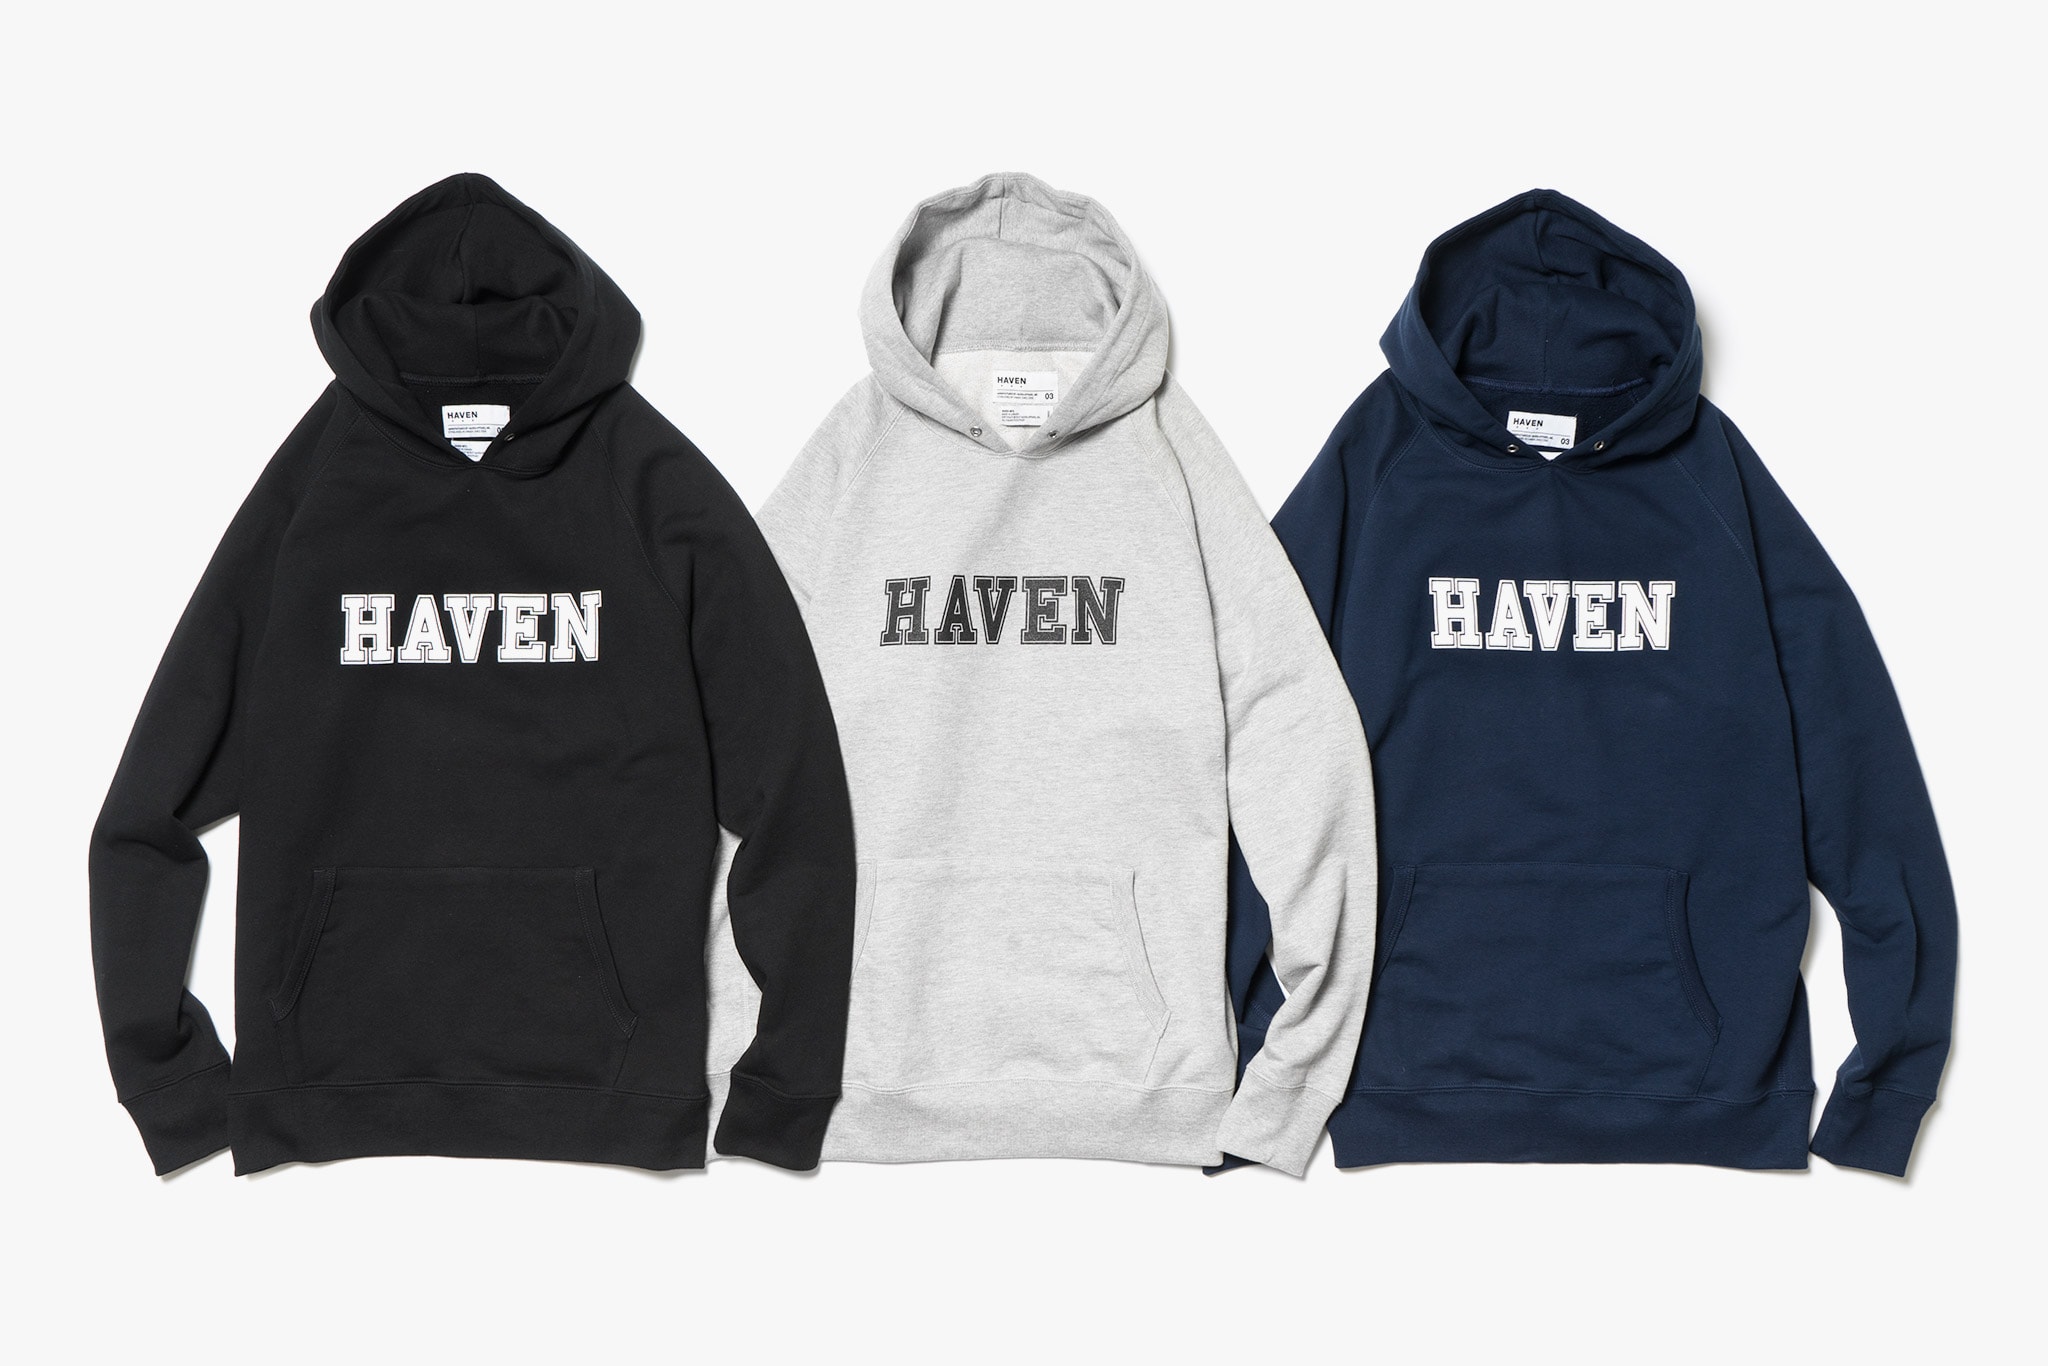 HAVEN Delivery 2 Collection Shirt Hoodies camo pants jackets